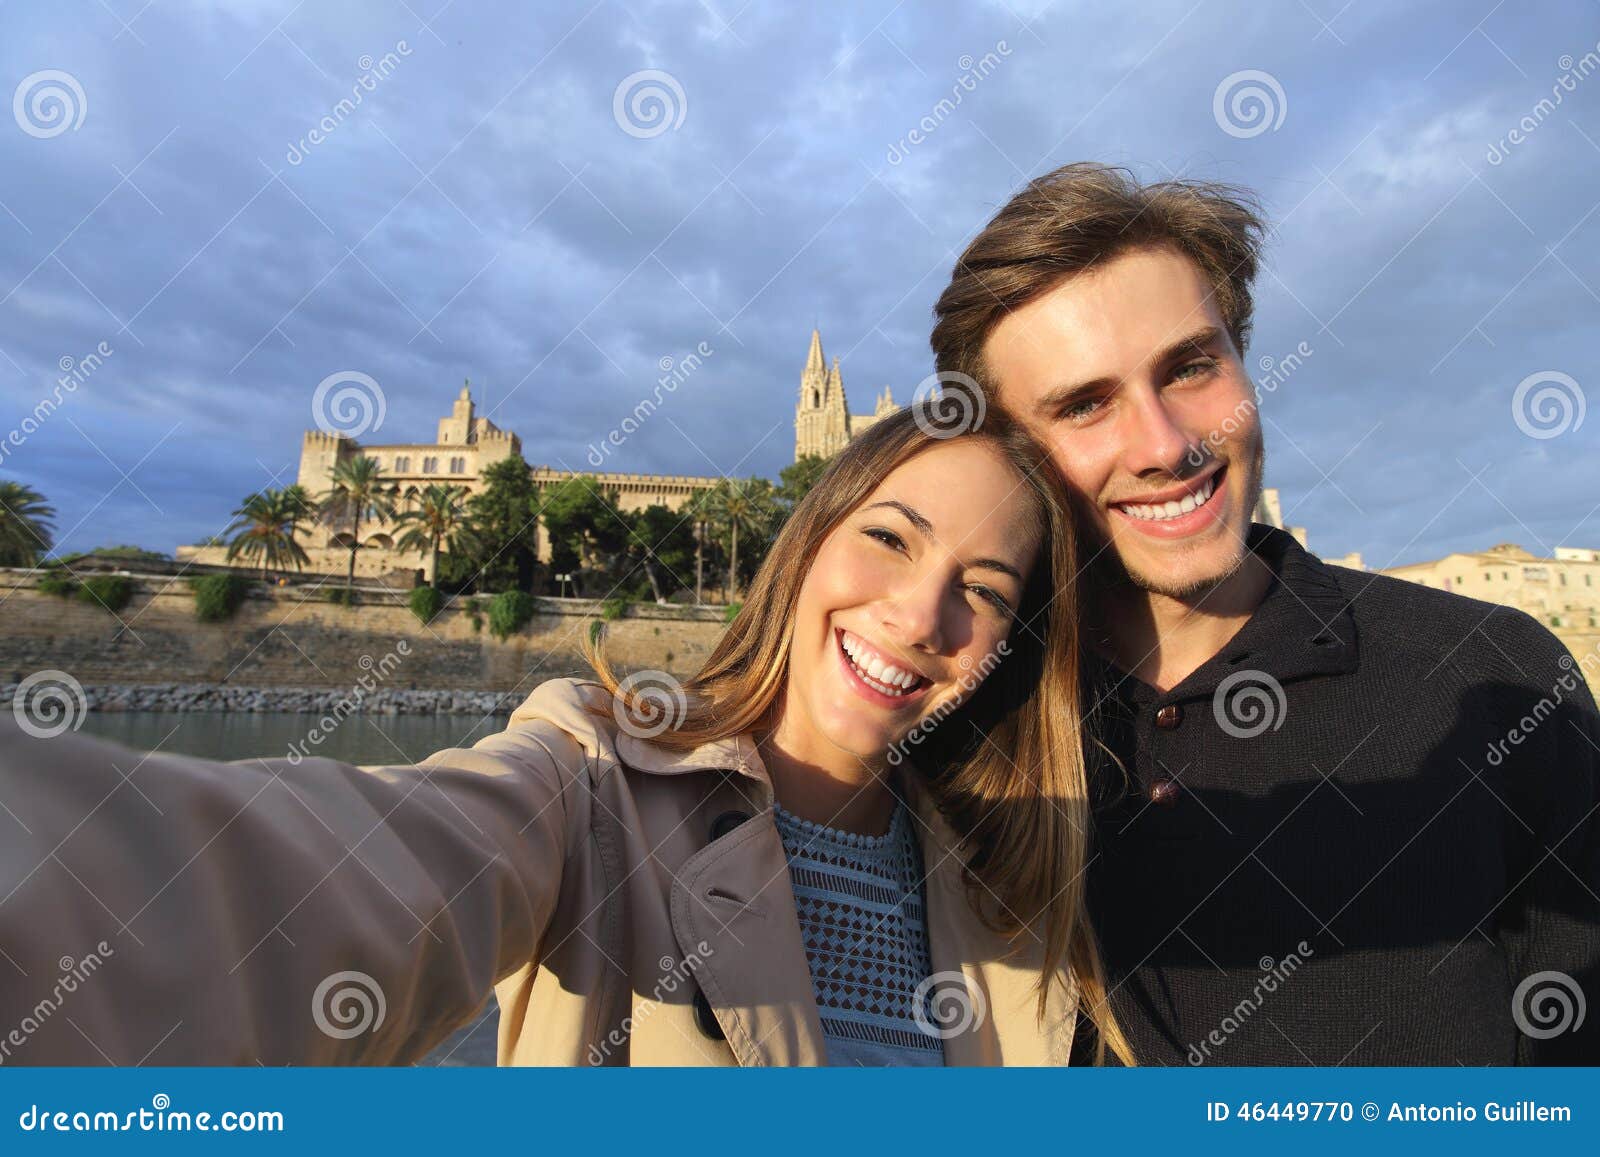 tourist couple on holidays photographing a selfie